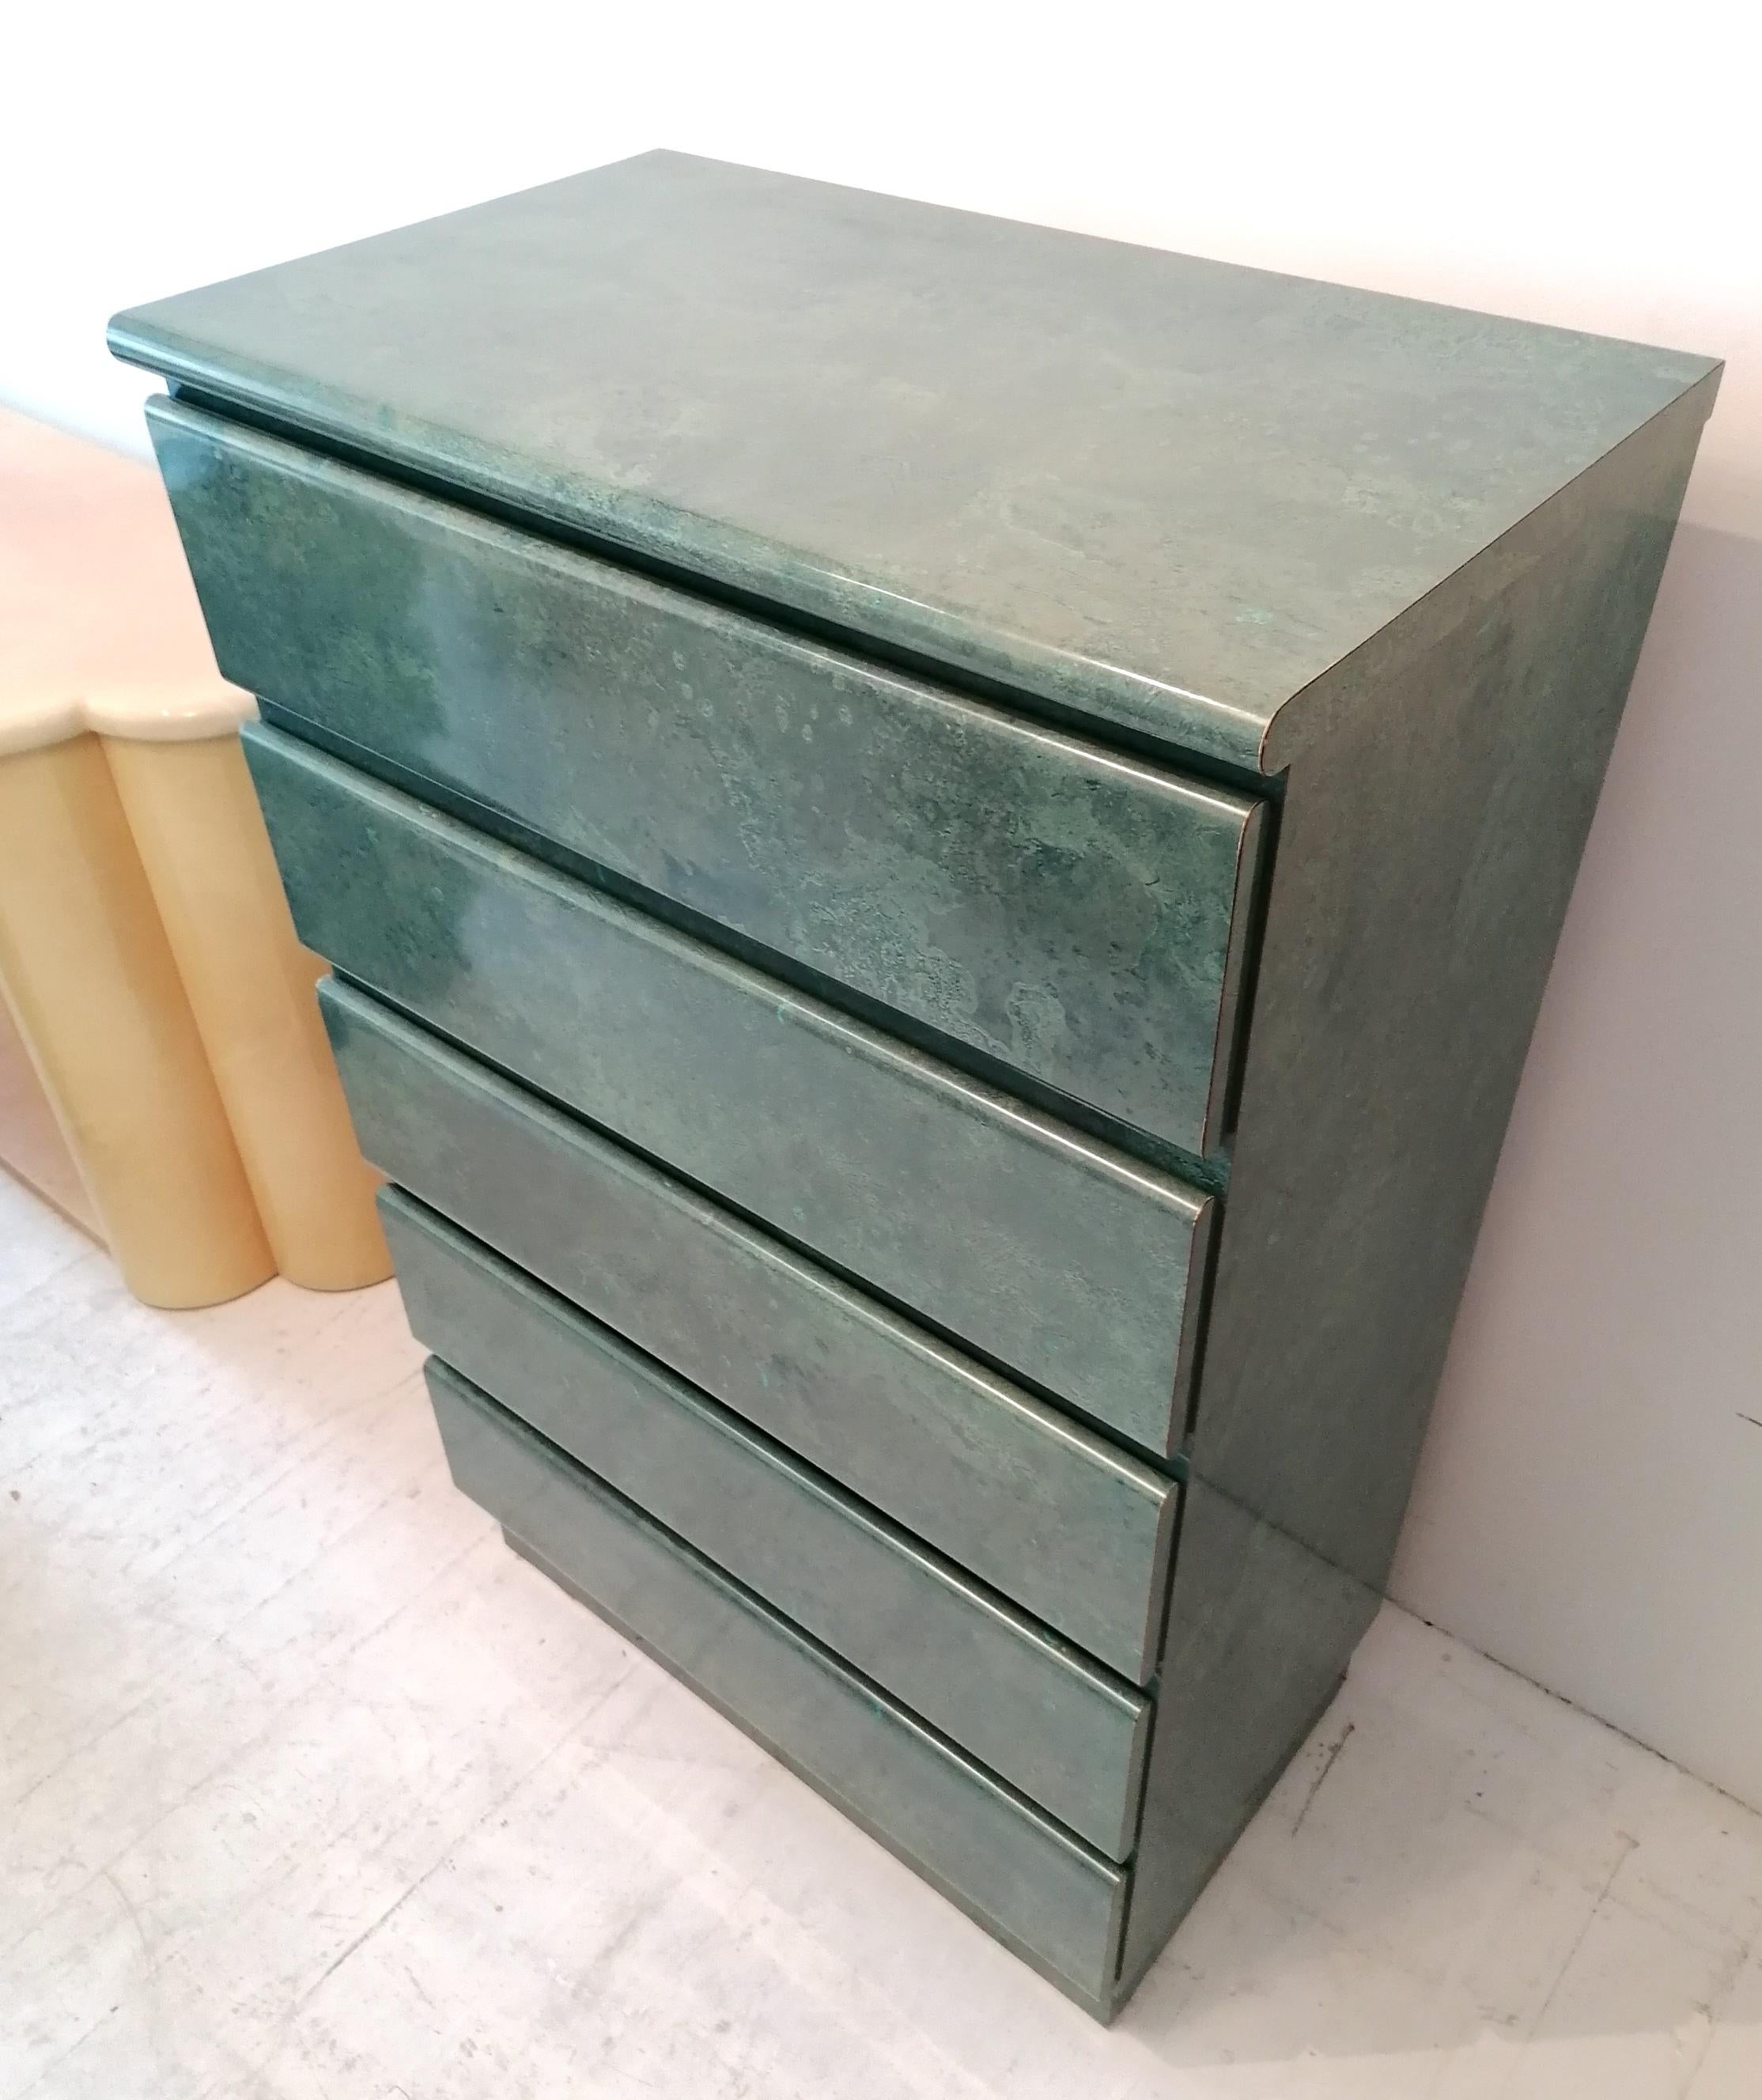 Vintage Aqua / Jade Lacquer Laminate Tall Drawer Cabinet, USA, 1980s For Sale 2